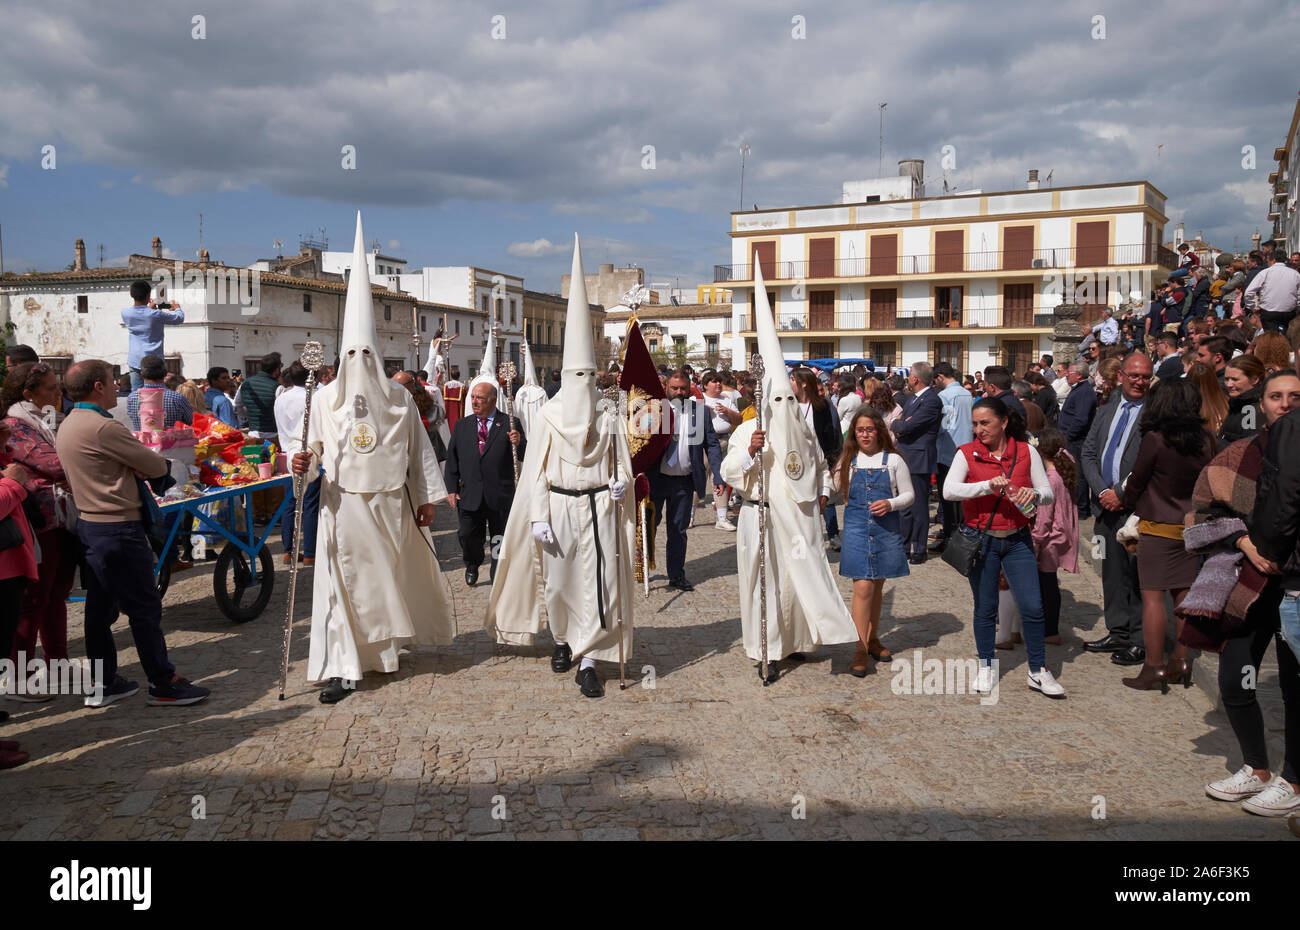 A religious brotherhood wearing penitential robes and conical hoods for a procession on Easter Sunday in Jerez de la Frontera, Andalusia, Spain. Stock Photo